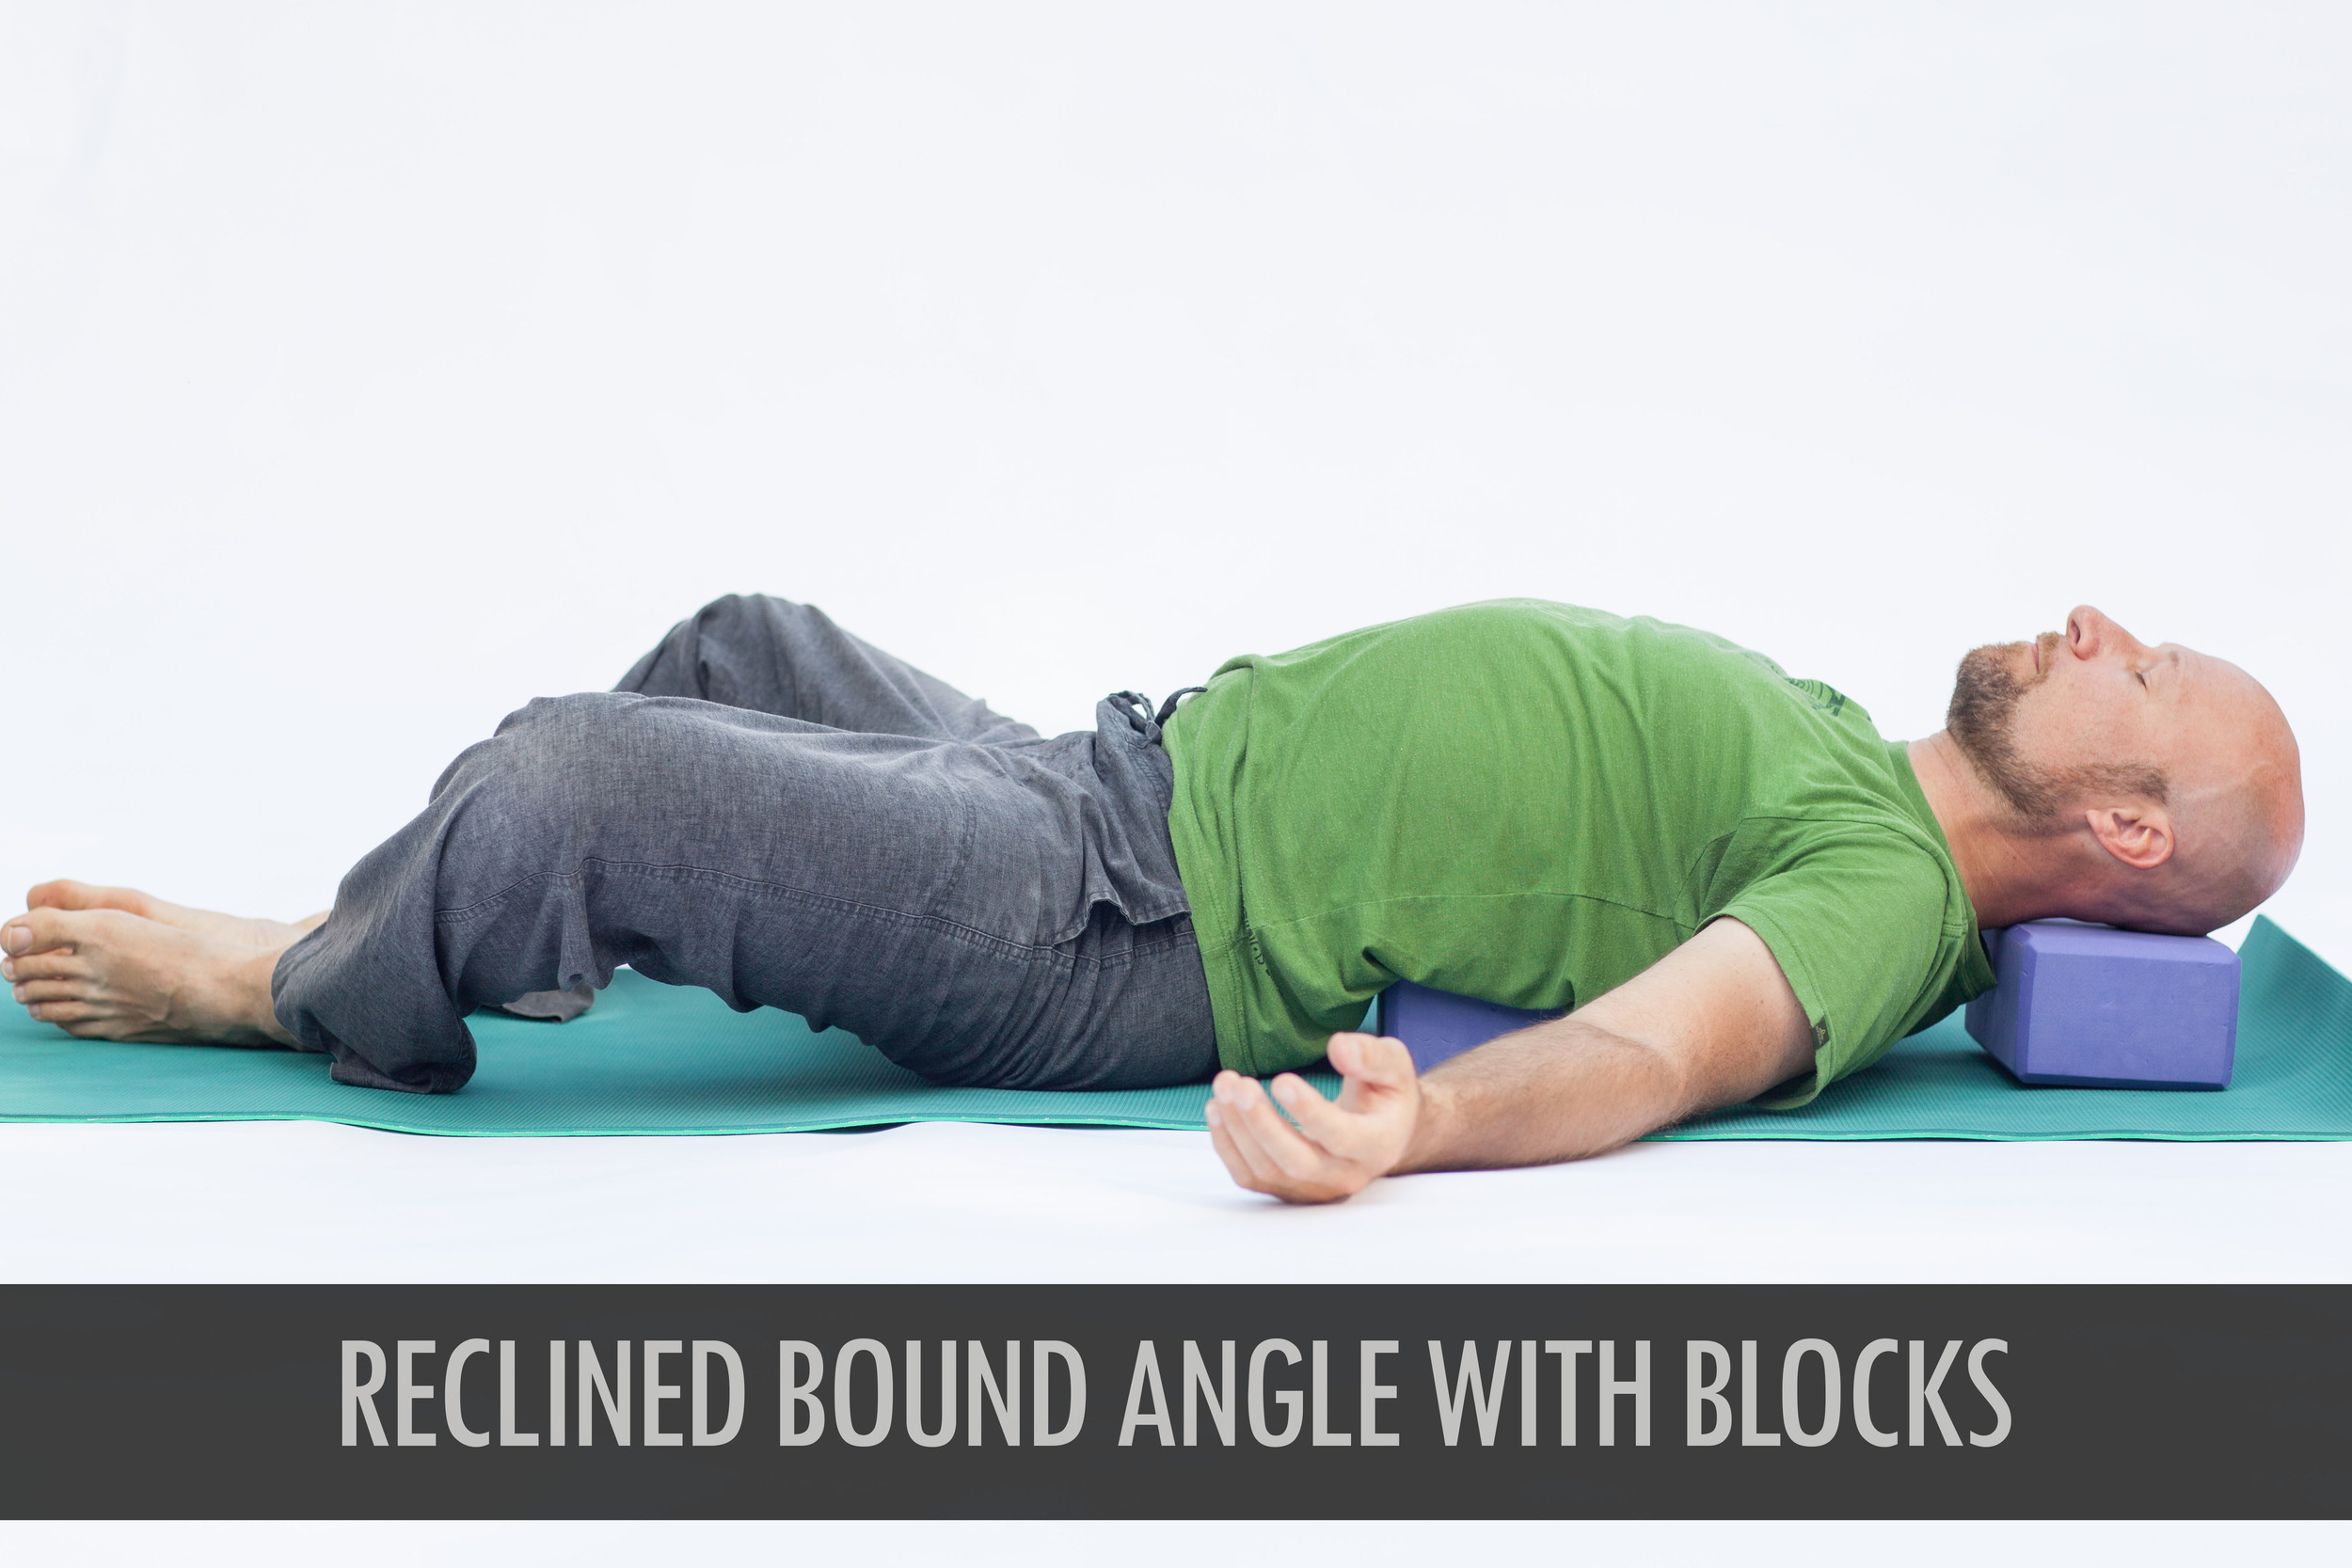 Reclined Bound Angle With Blocks.jpg